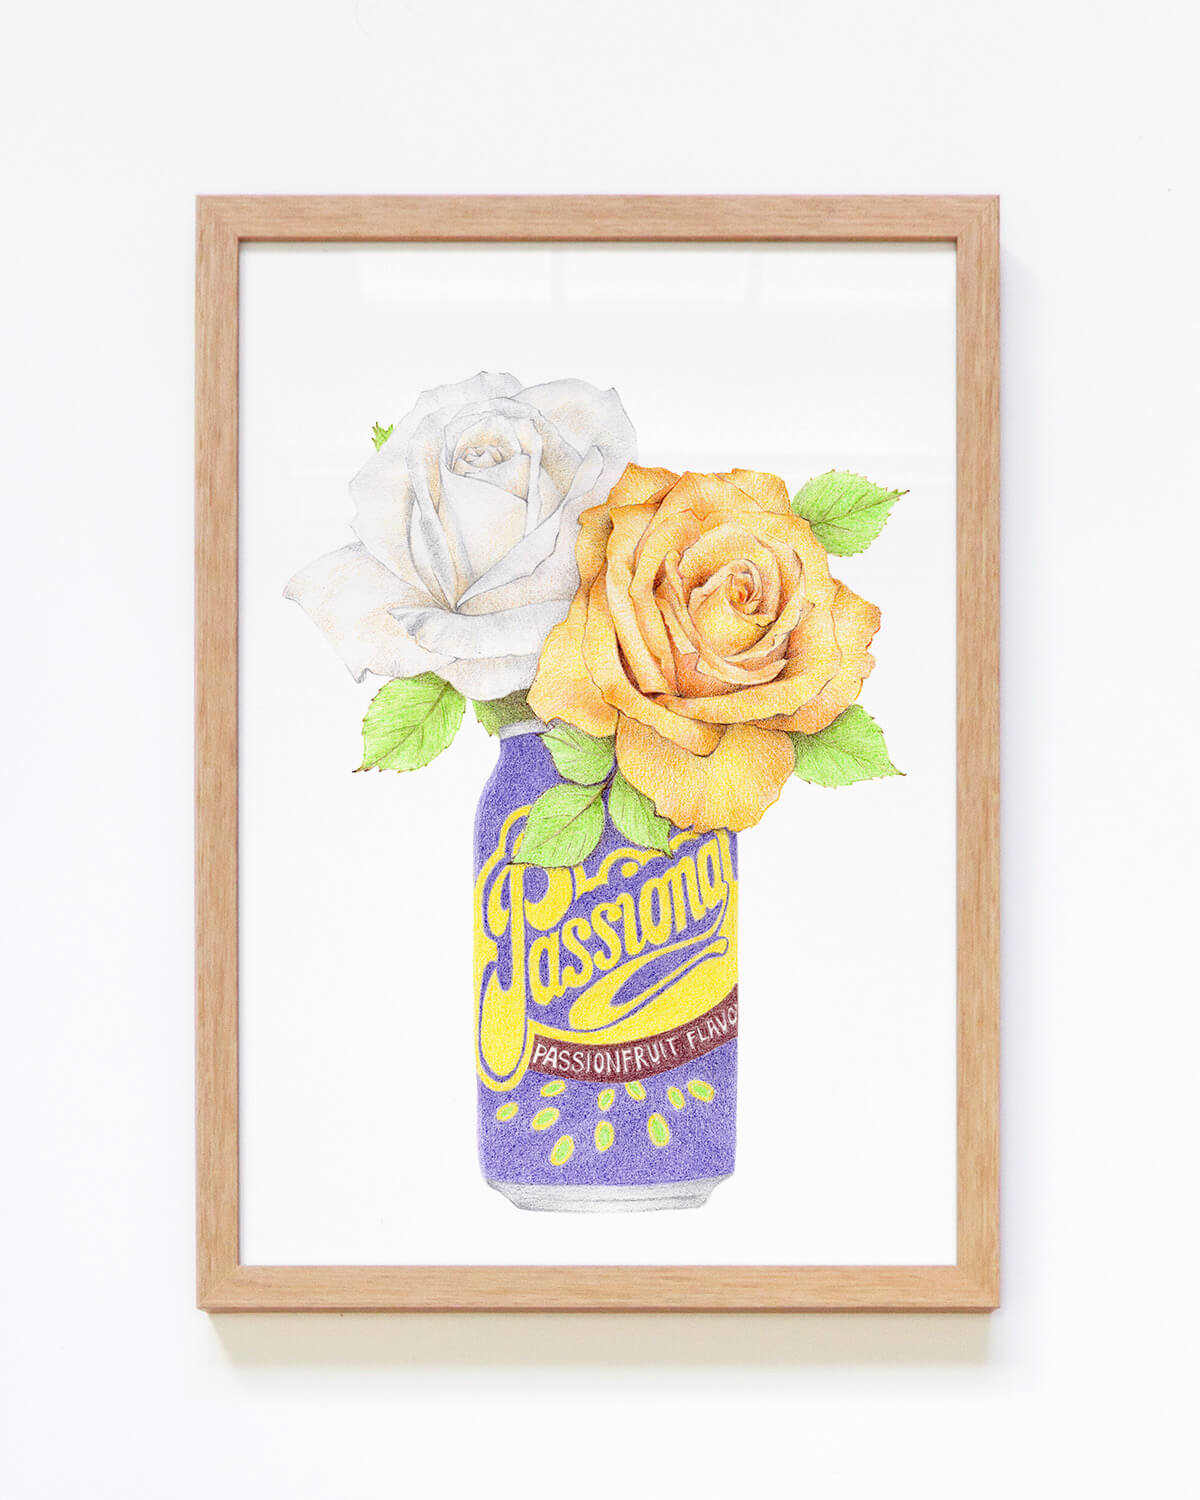 Passiona Soft drink with roses giclee framed art print 